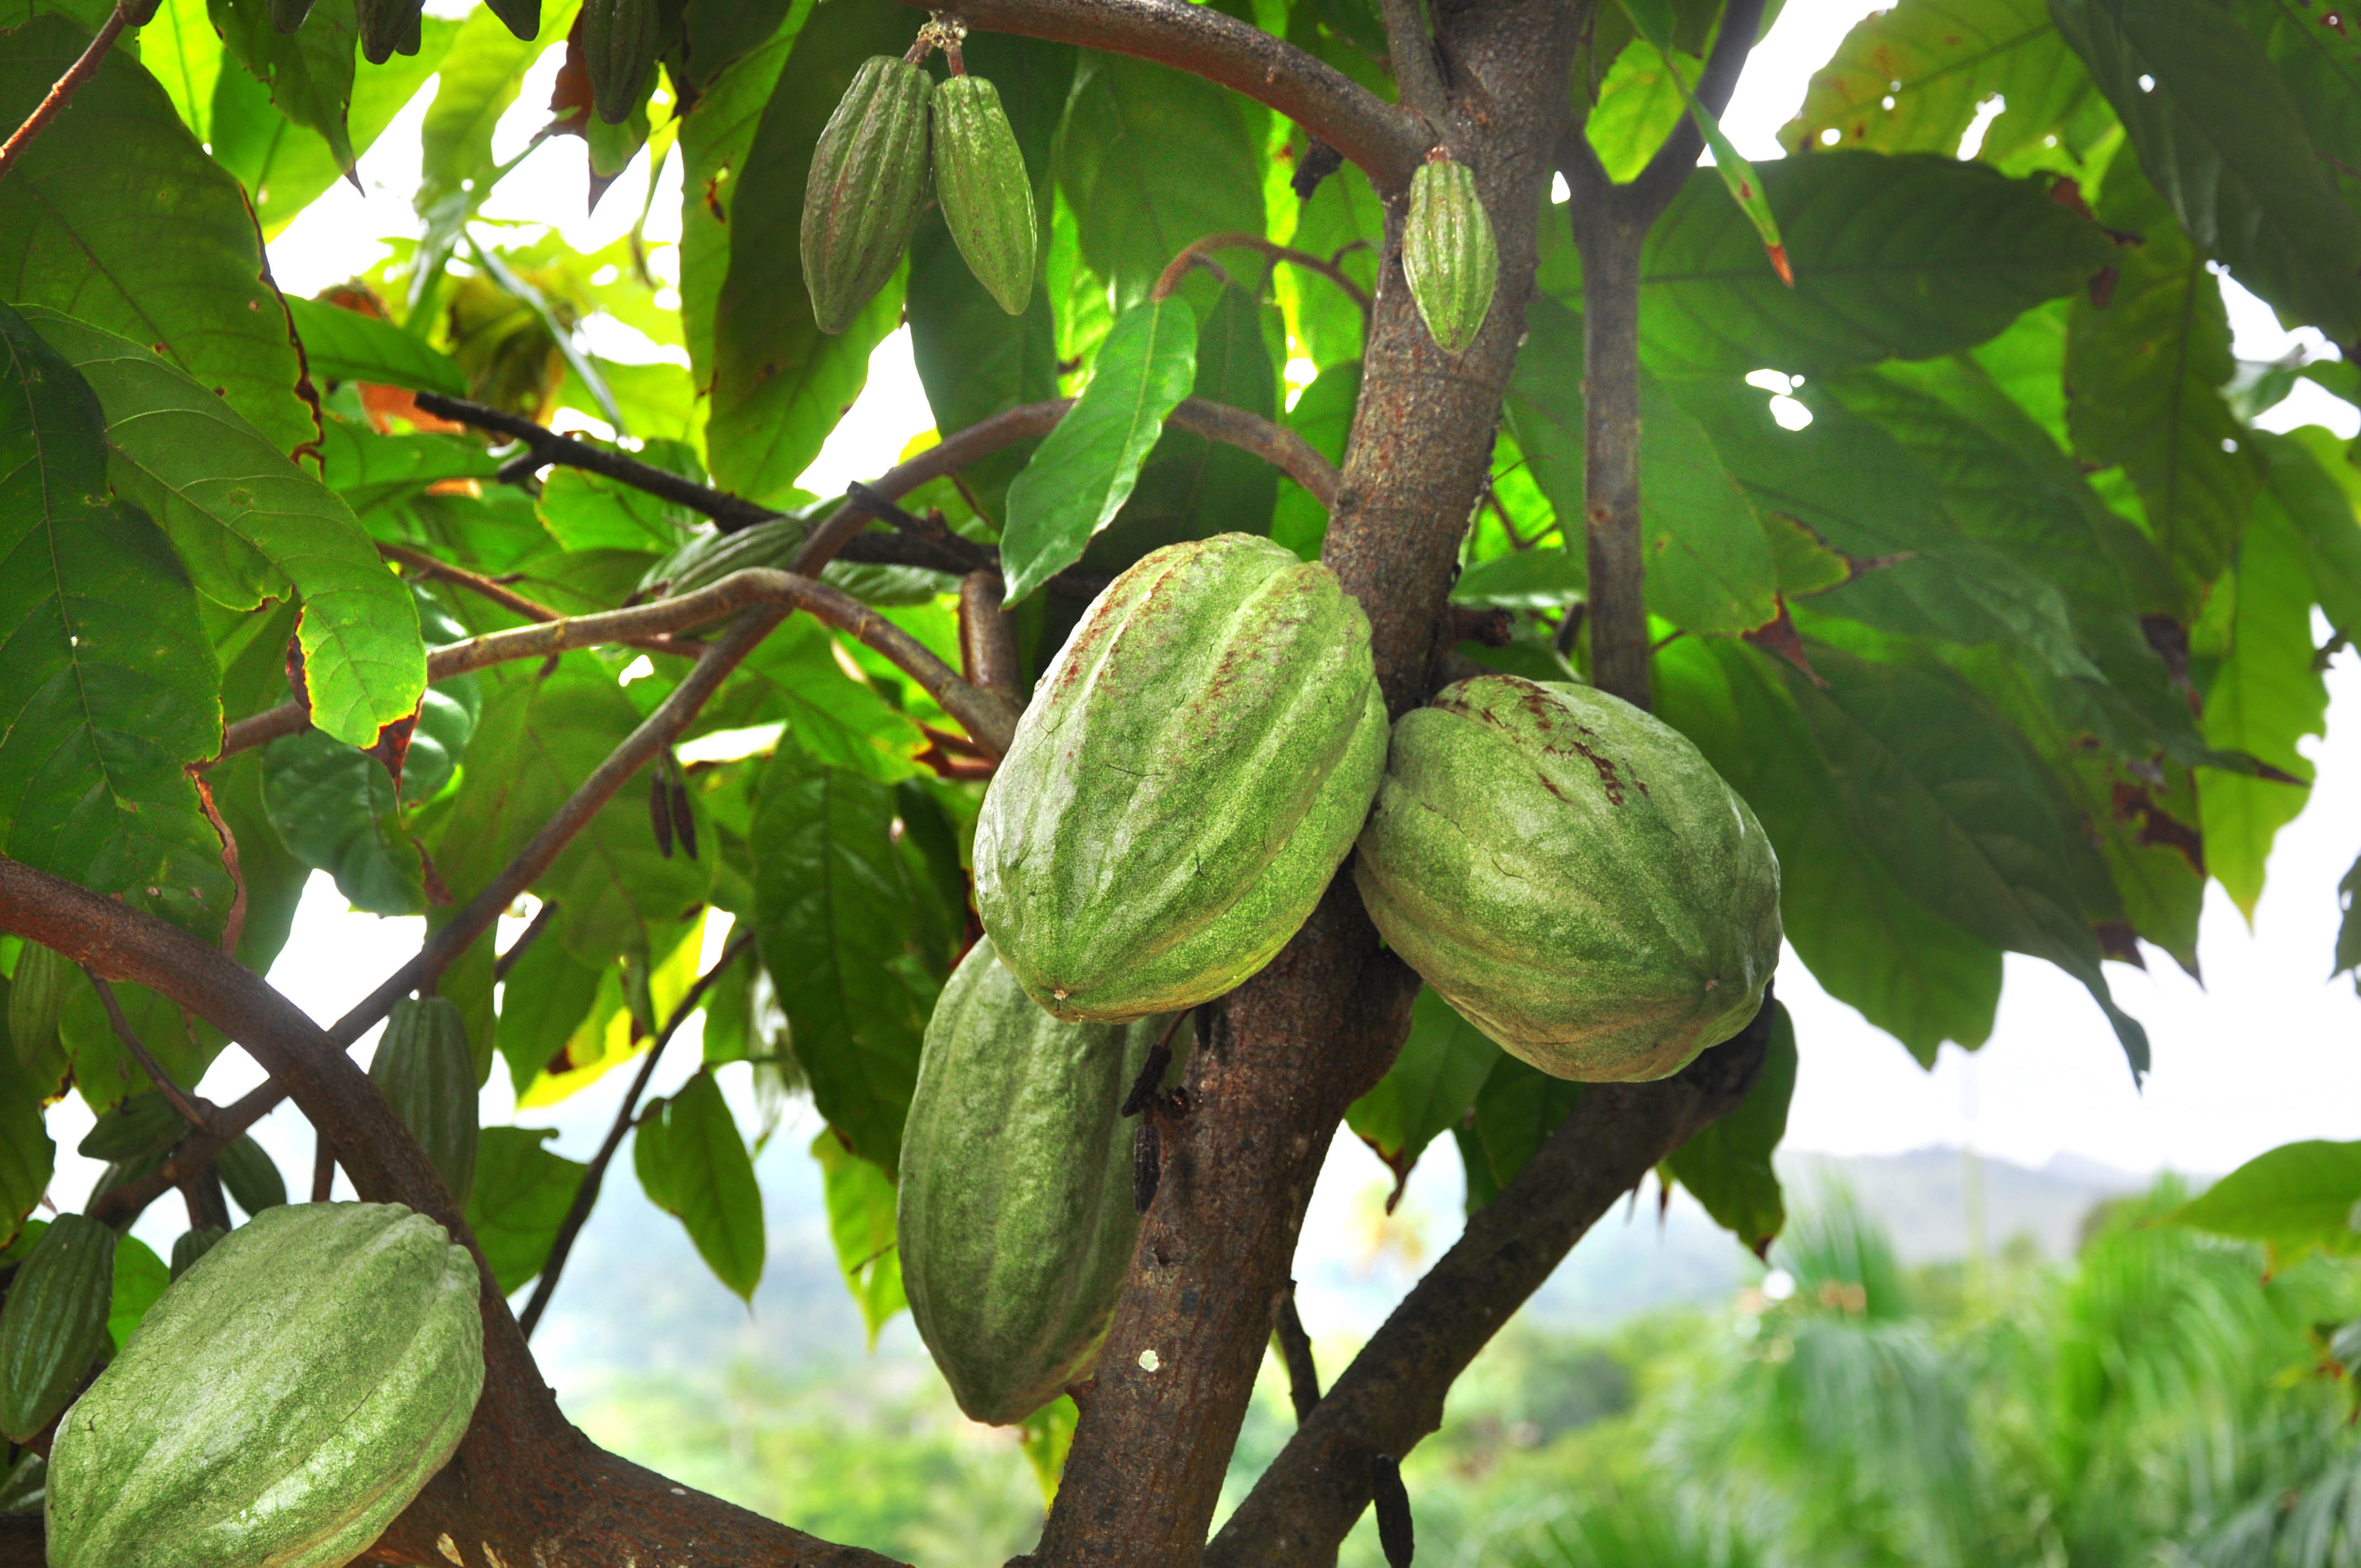 Maman Pye cacao, a Haitian supertree, can produce 20 times as many cacao pods as ordinary trees, and the pods themselves are denser with cacao seeds than ordinary pods. Photo: Shutterstock